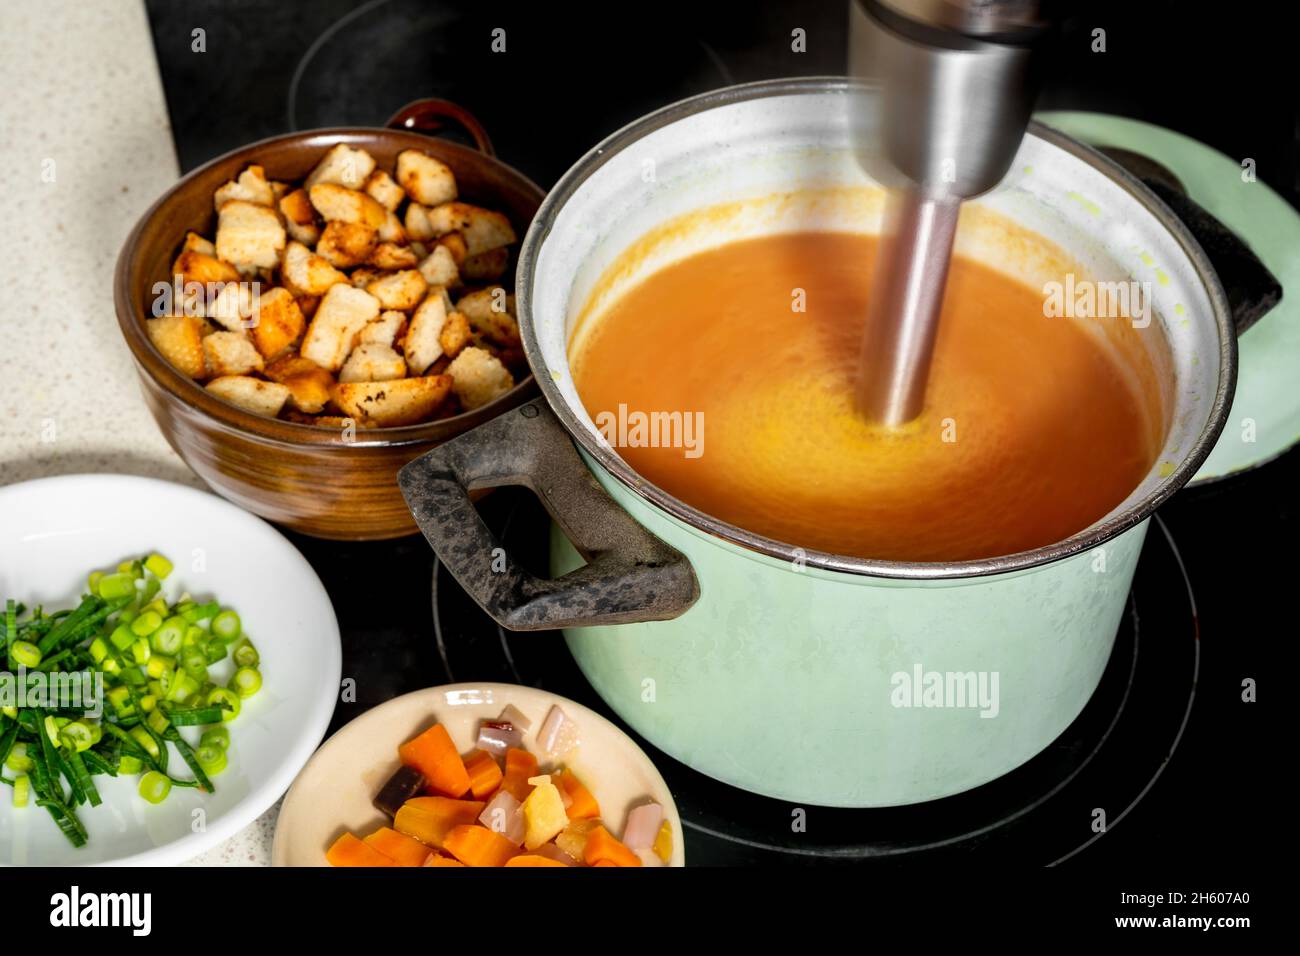 https://c8.alamy.com/comp/2H607A0/hand-blender-in-pot-on-stove-mixes-carrot-soup-plates-with-vegetable-and-sliced-fried-bread-on-kitchen-board-preparation-fresh-carrot-soup-2H607A0.jpg